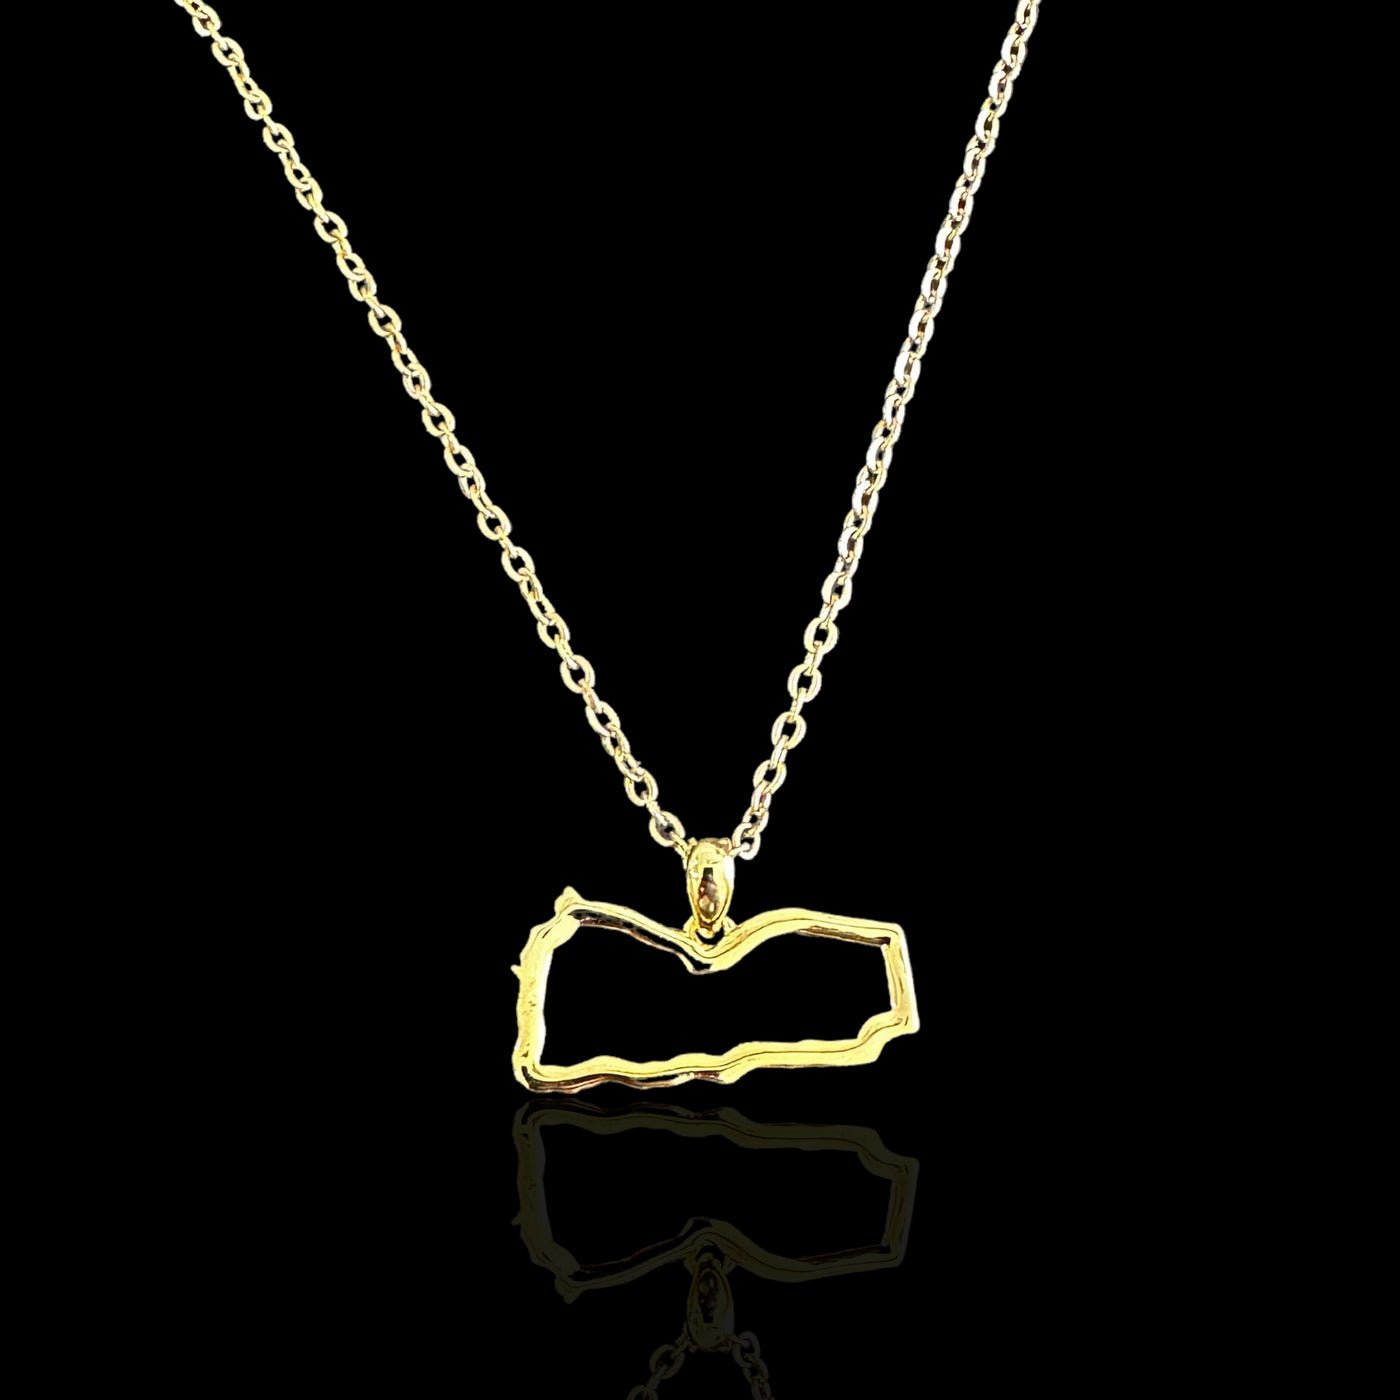 Sterling Silver Yemen Map Outline Necklace - Available in 3 Colors